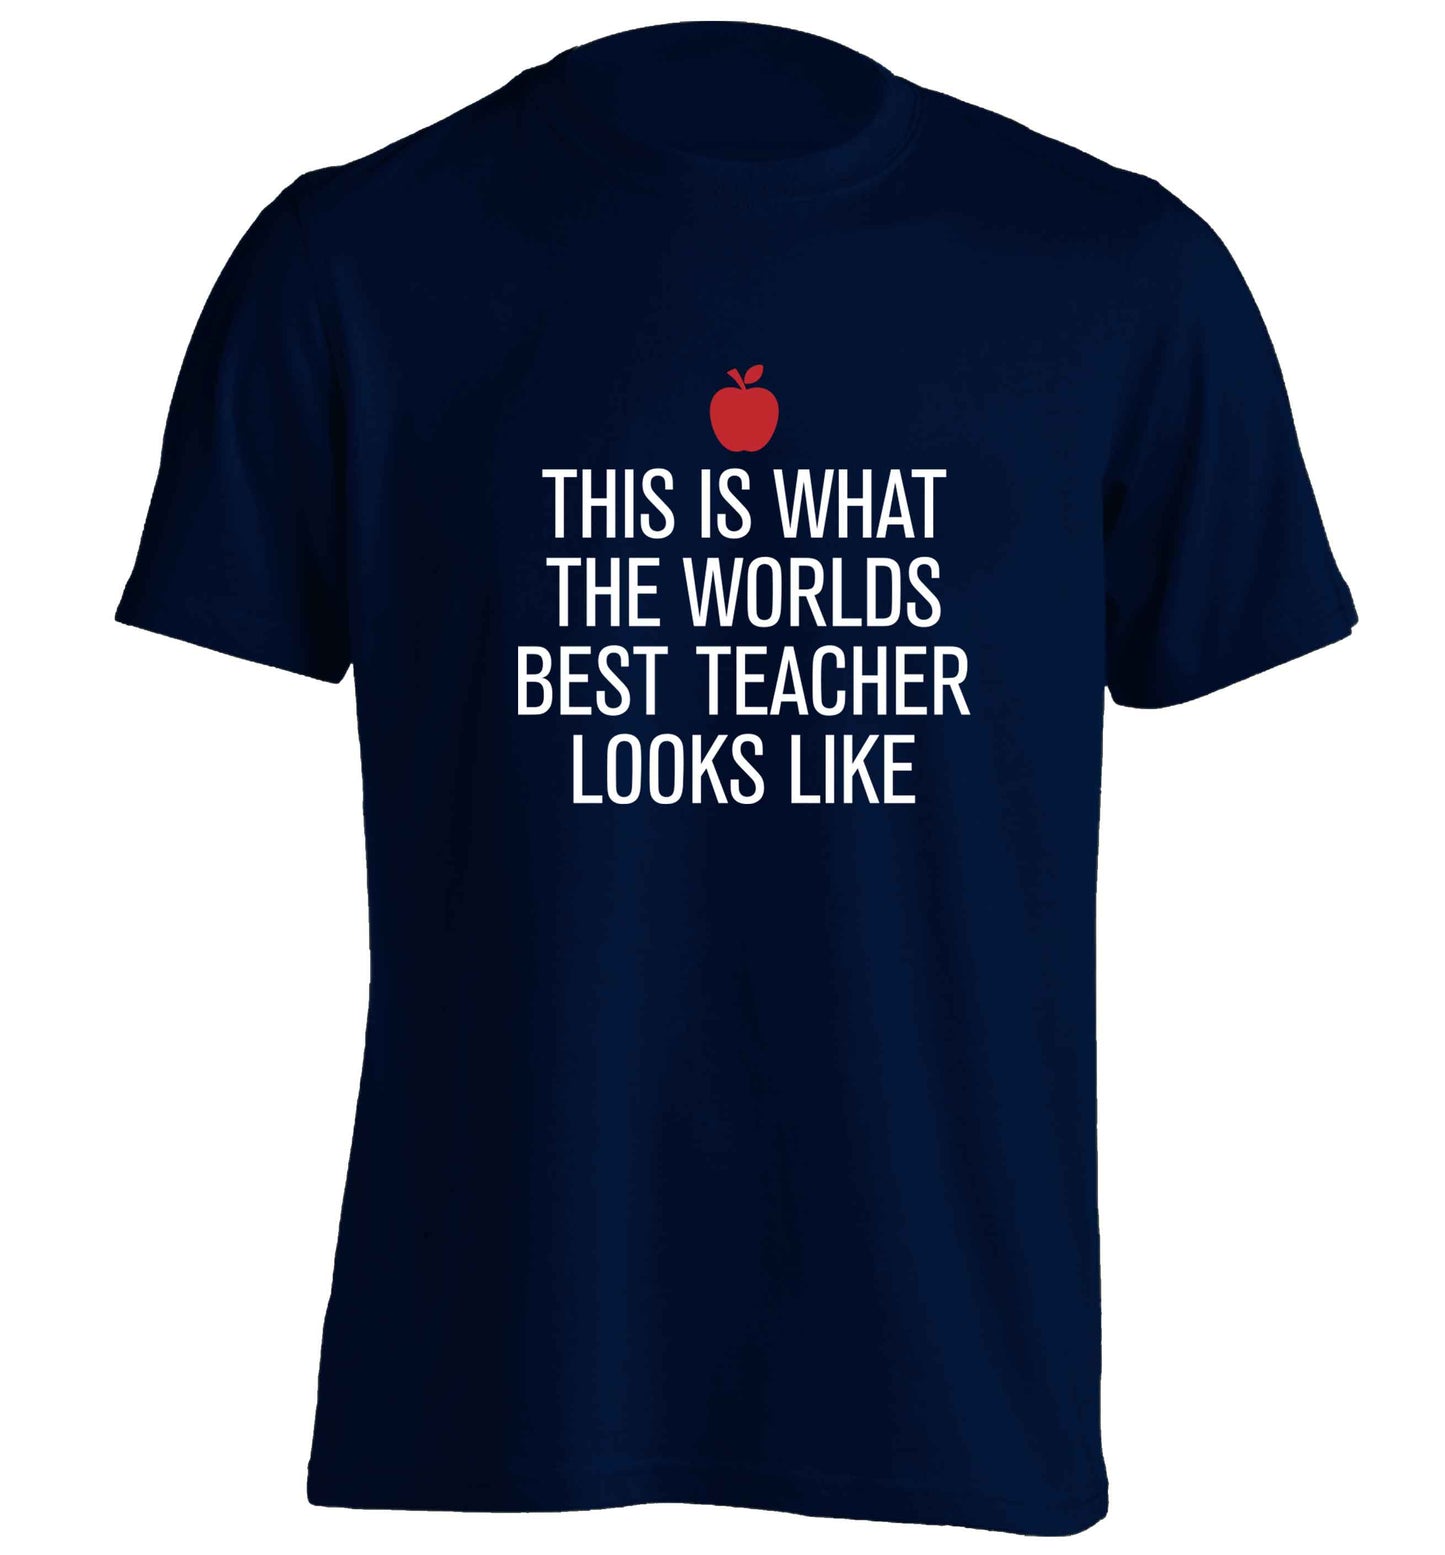 This is what the worlds best teacher looks like adults unisex navy Tshirt 2XL